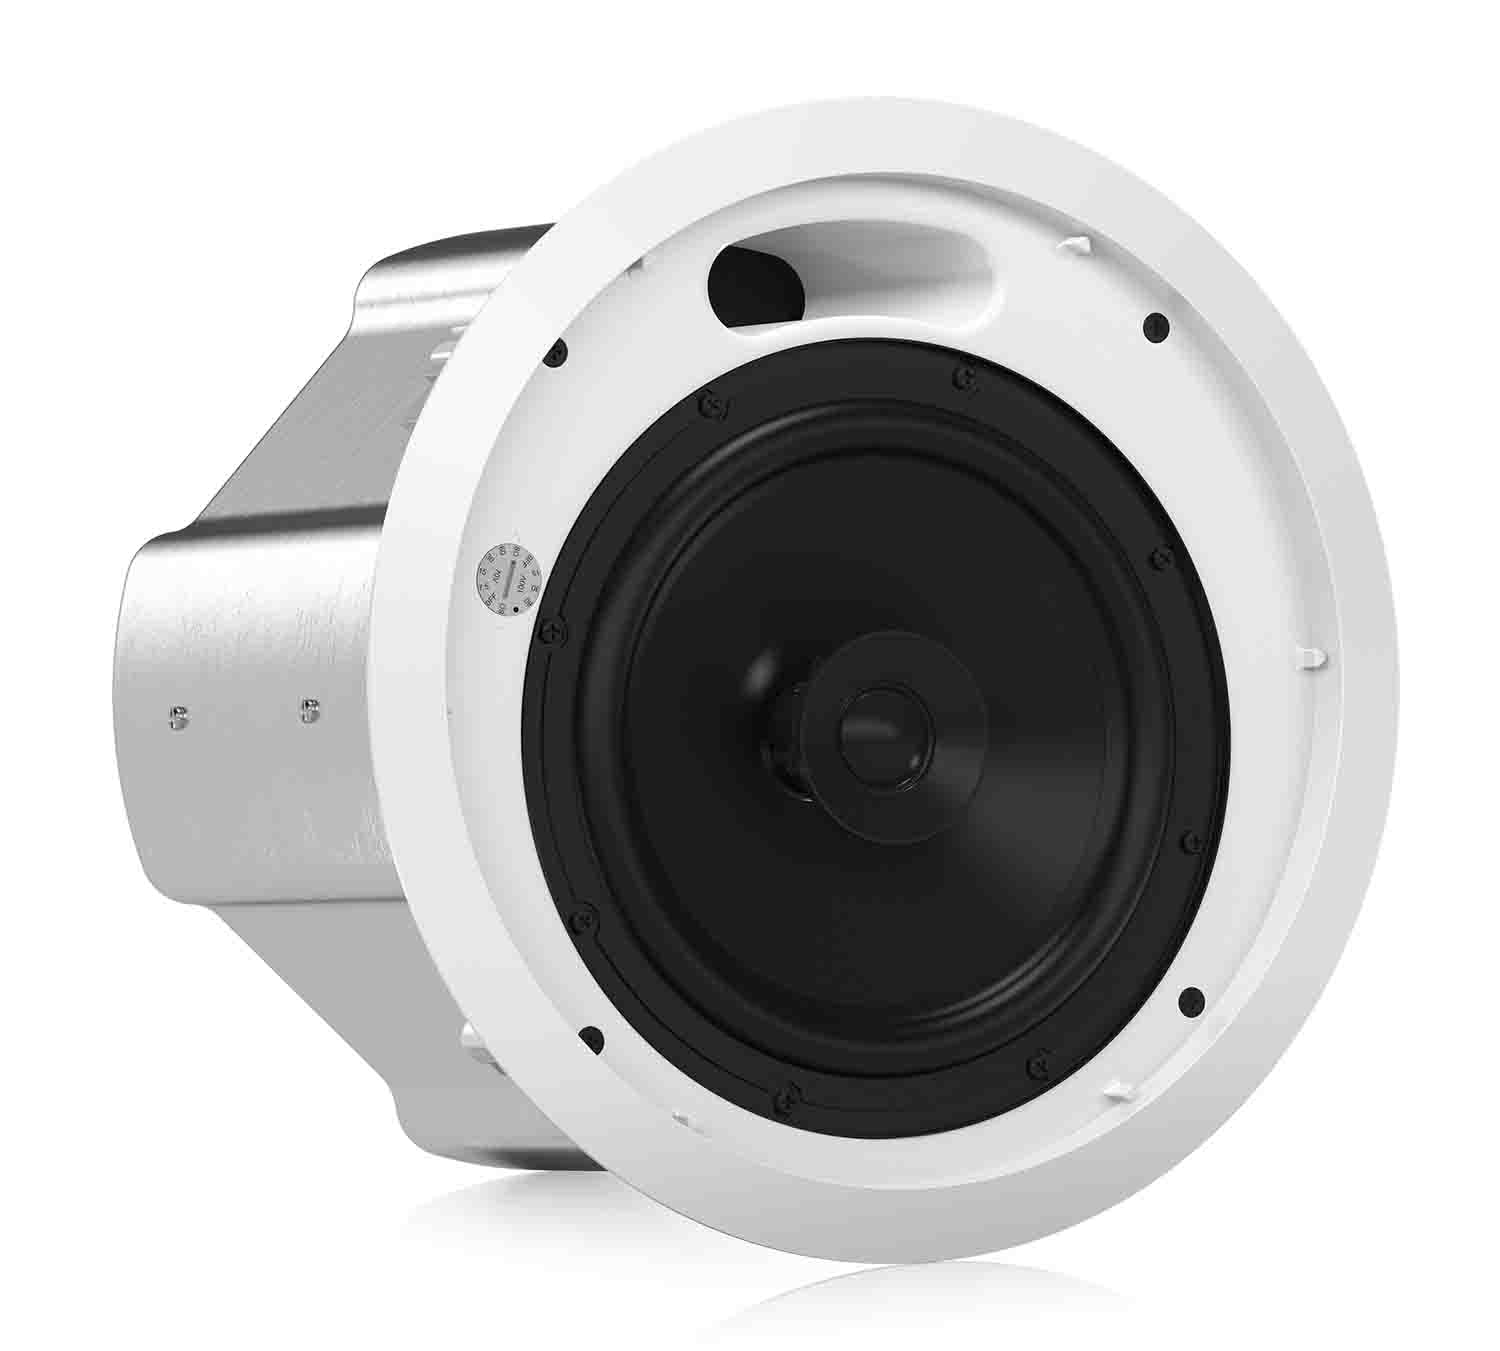 Tannoy CVS 801, 8-Inch Coaxial In-Ceiling Loudspeaker for Installation Applications - Hollywood DJ